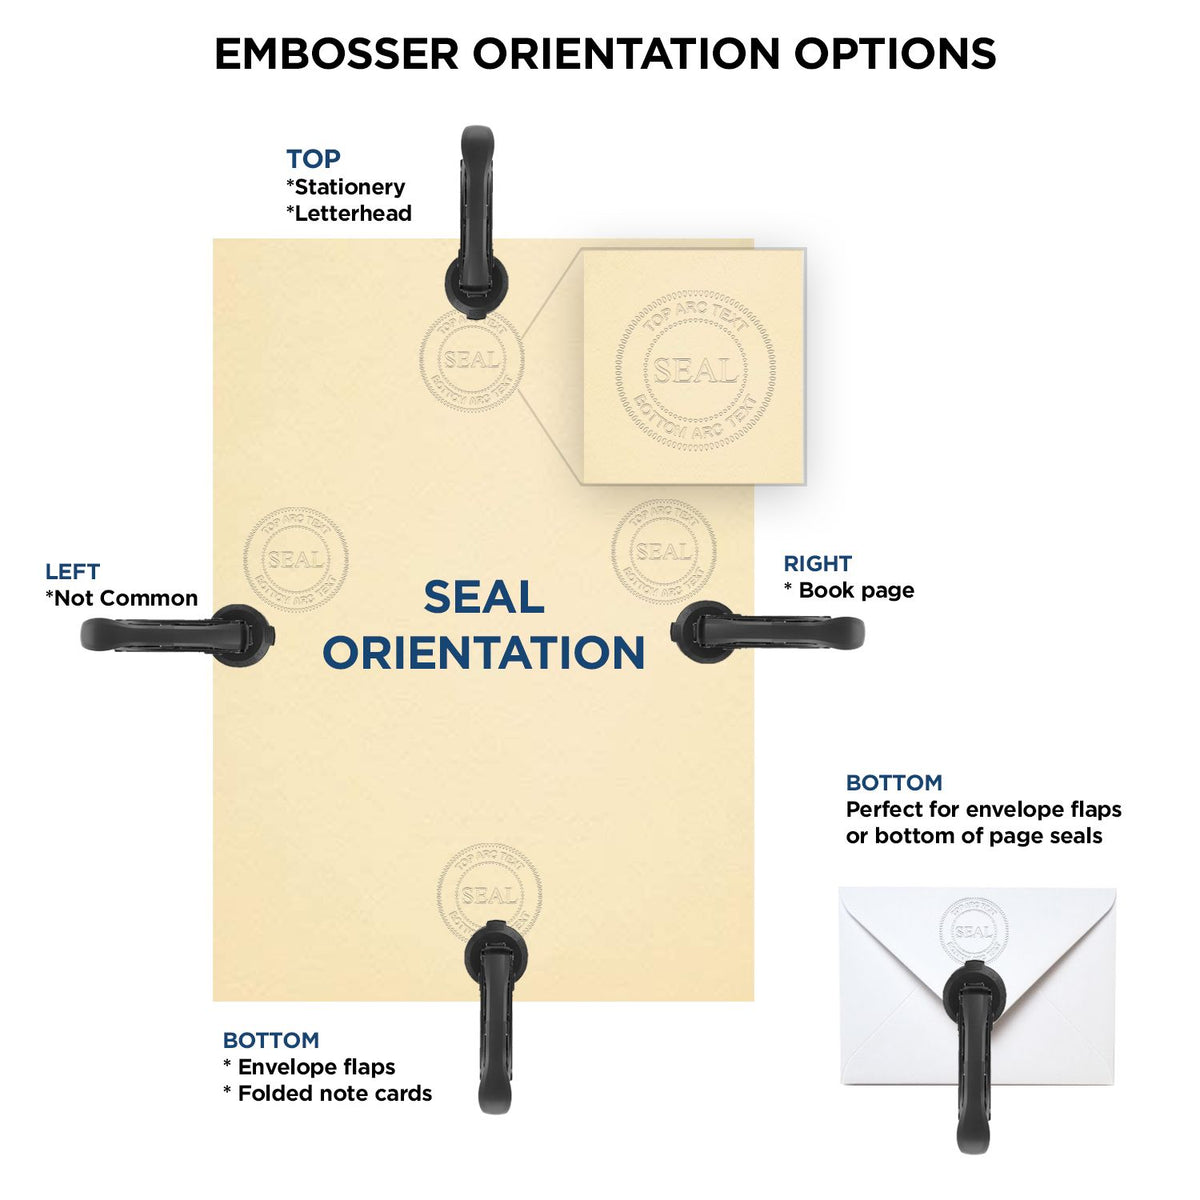 An infographic for the Gift Delaware Architect Seal showing embosser orientation, this is showing examples of a top, bottom, right and left insert.